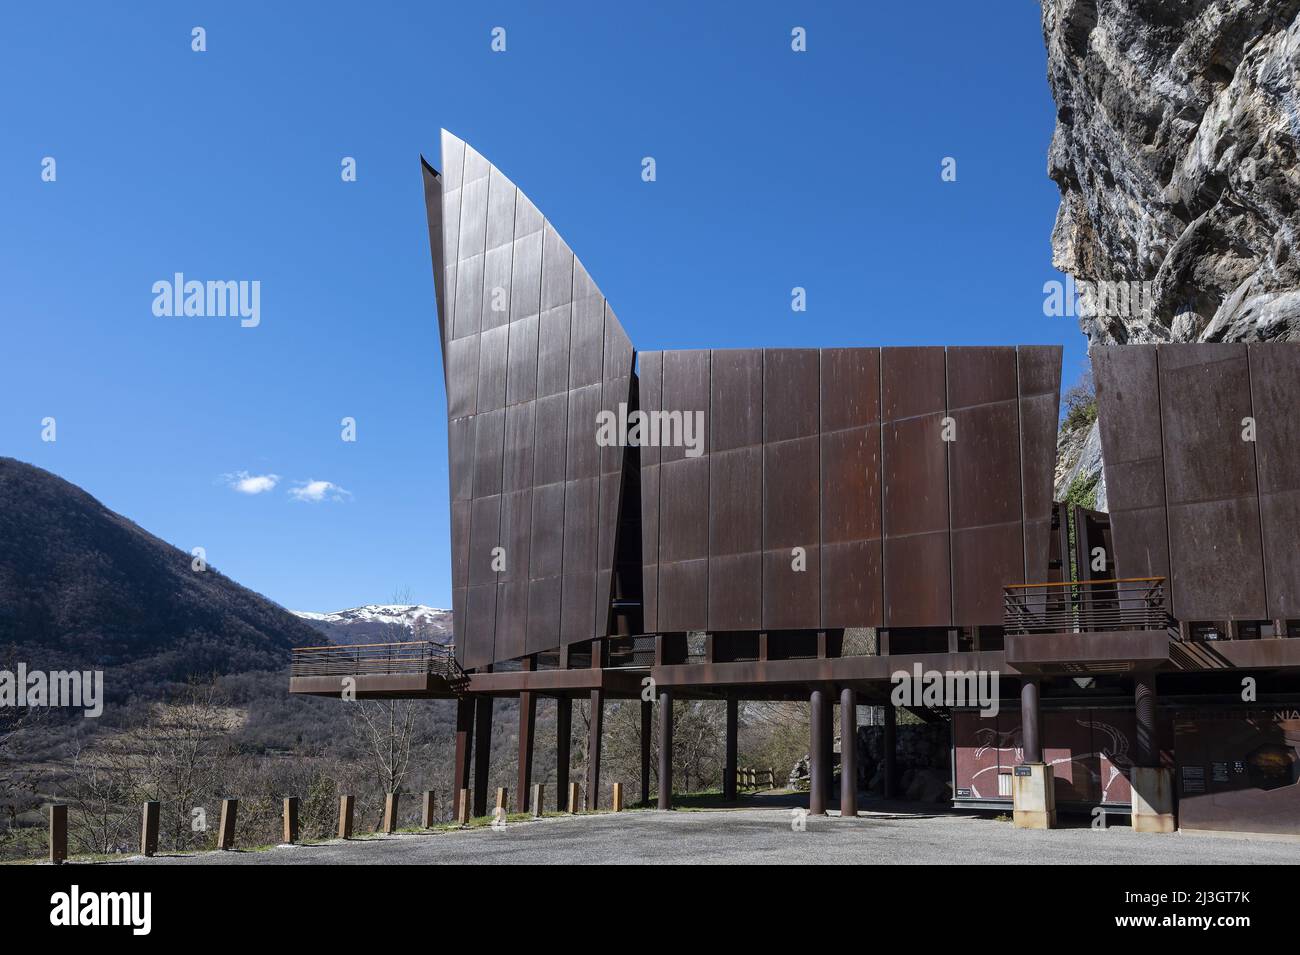 France, Ariege, Pyrenees massif, Tarascon sur Ariege, steel building of the entrance to the decorated prehistoric cave of Niaux Stock Photo